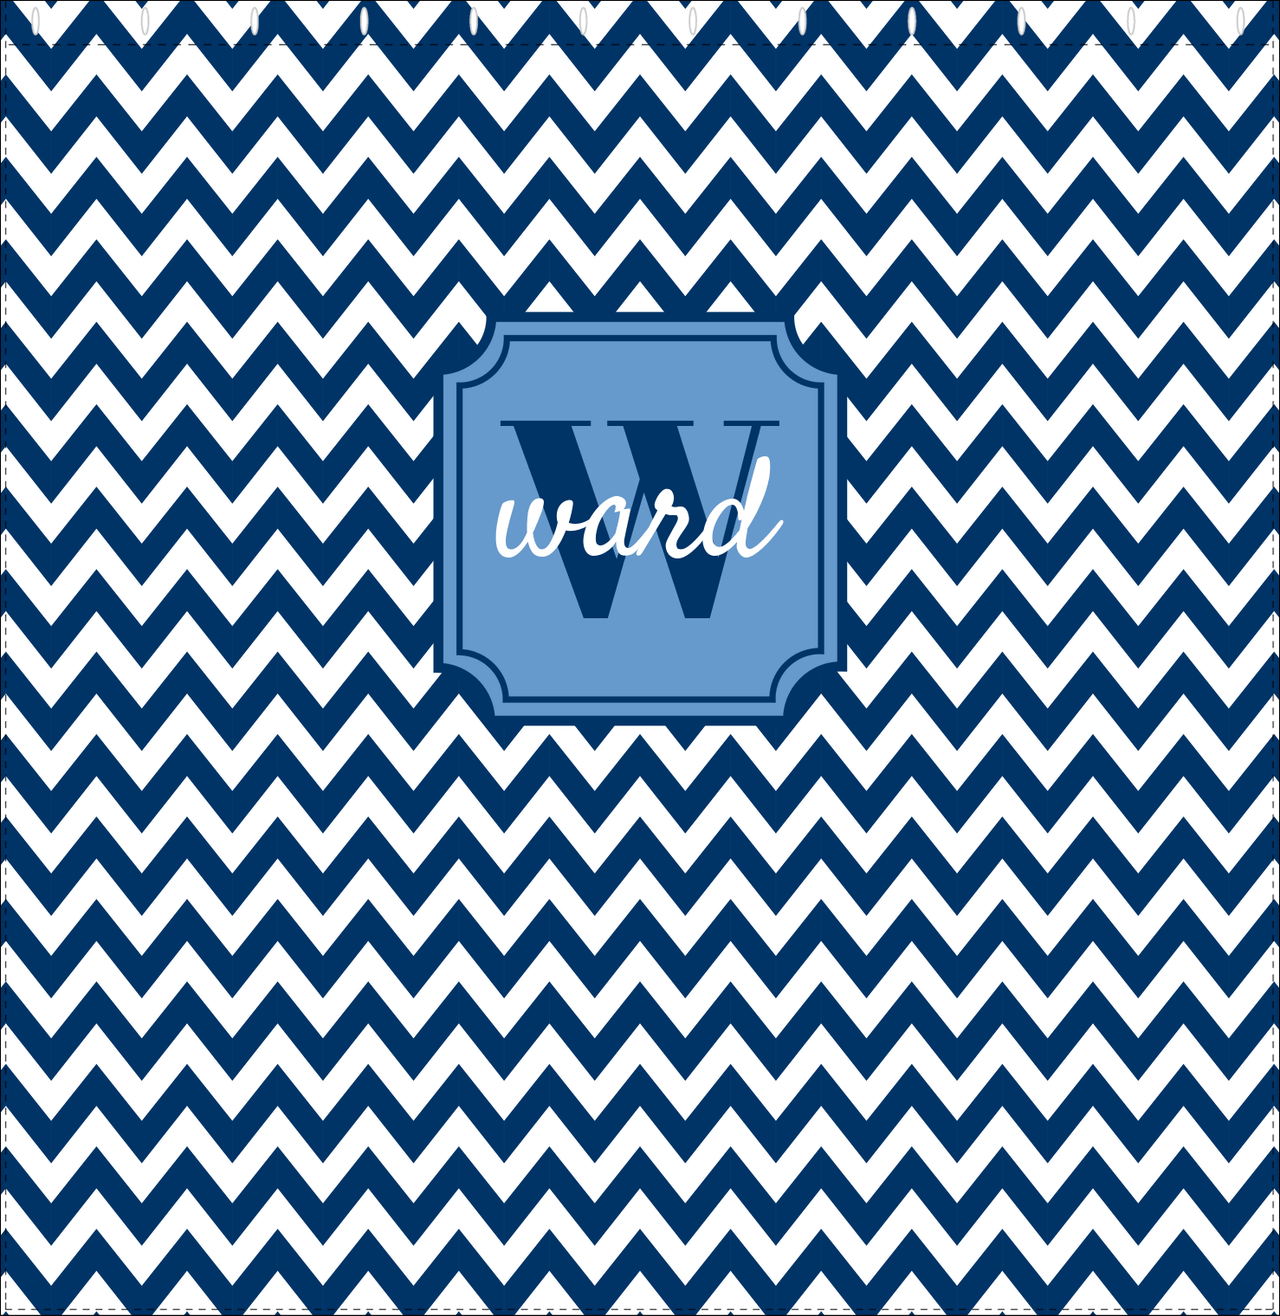 Personalized Chevron Shower Curtain II - Blue and White - Stamp Nameplate - Decorate View